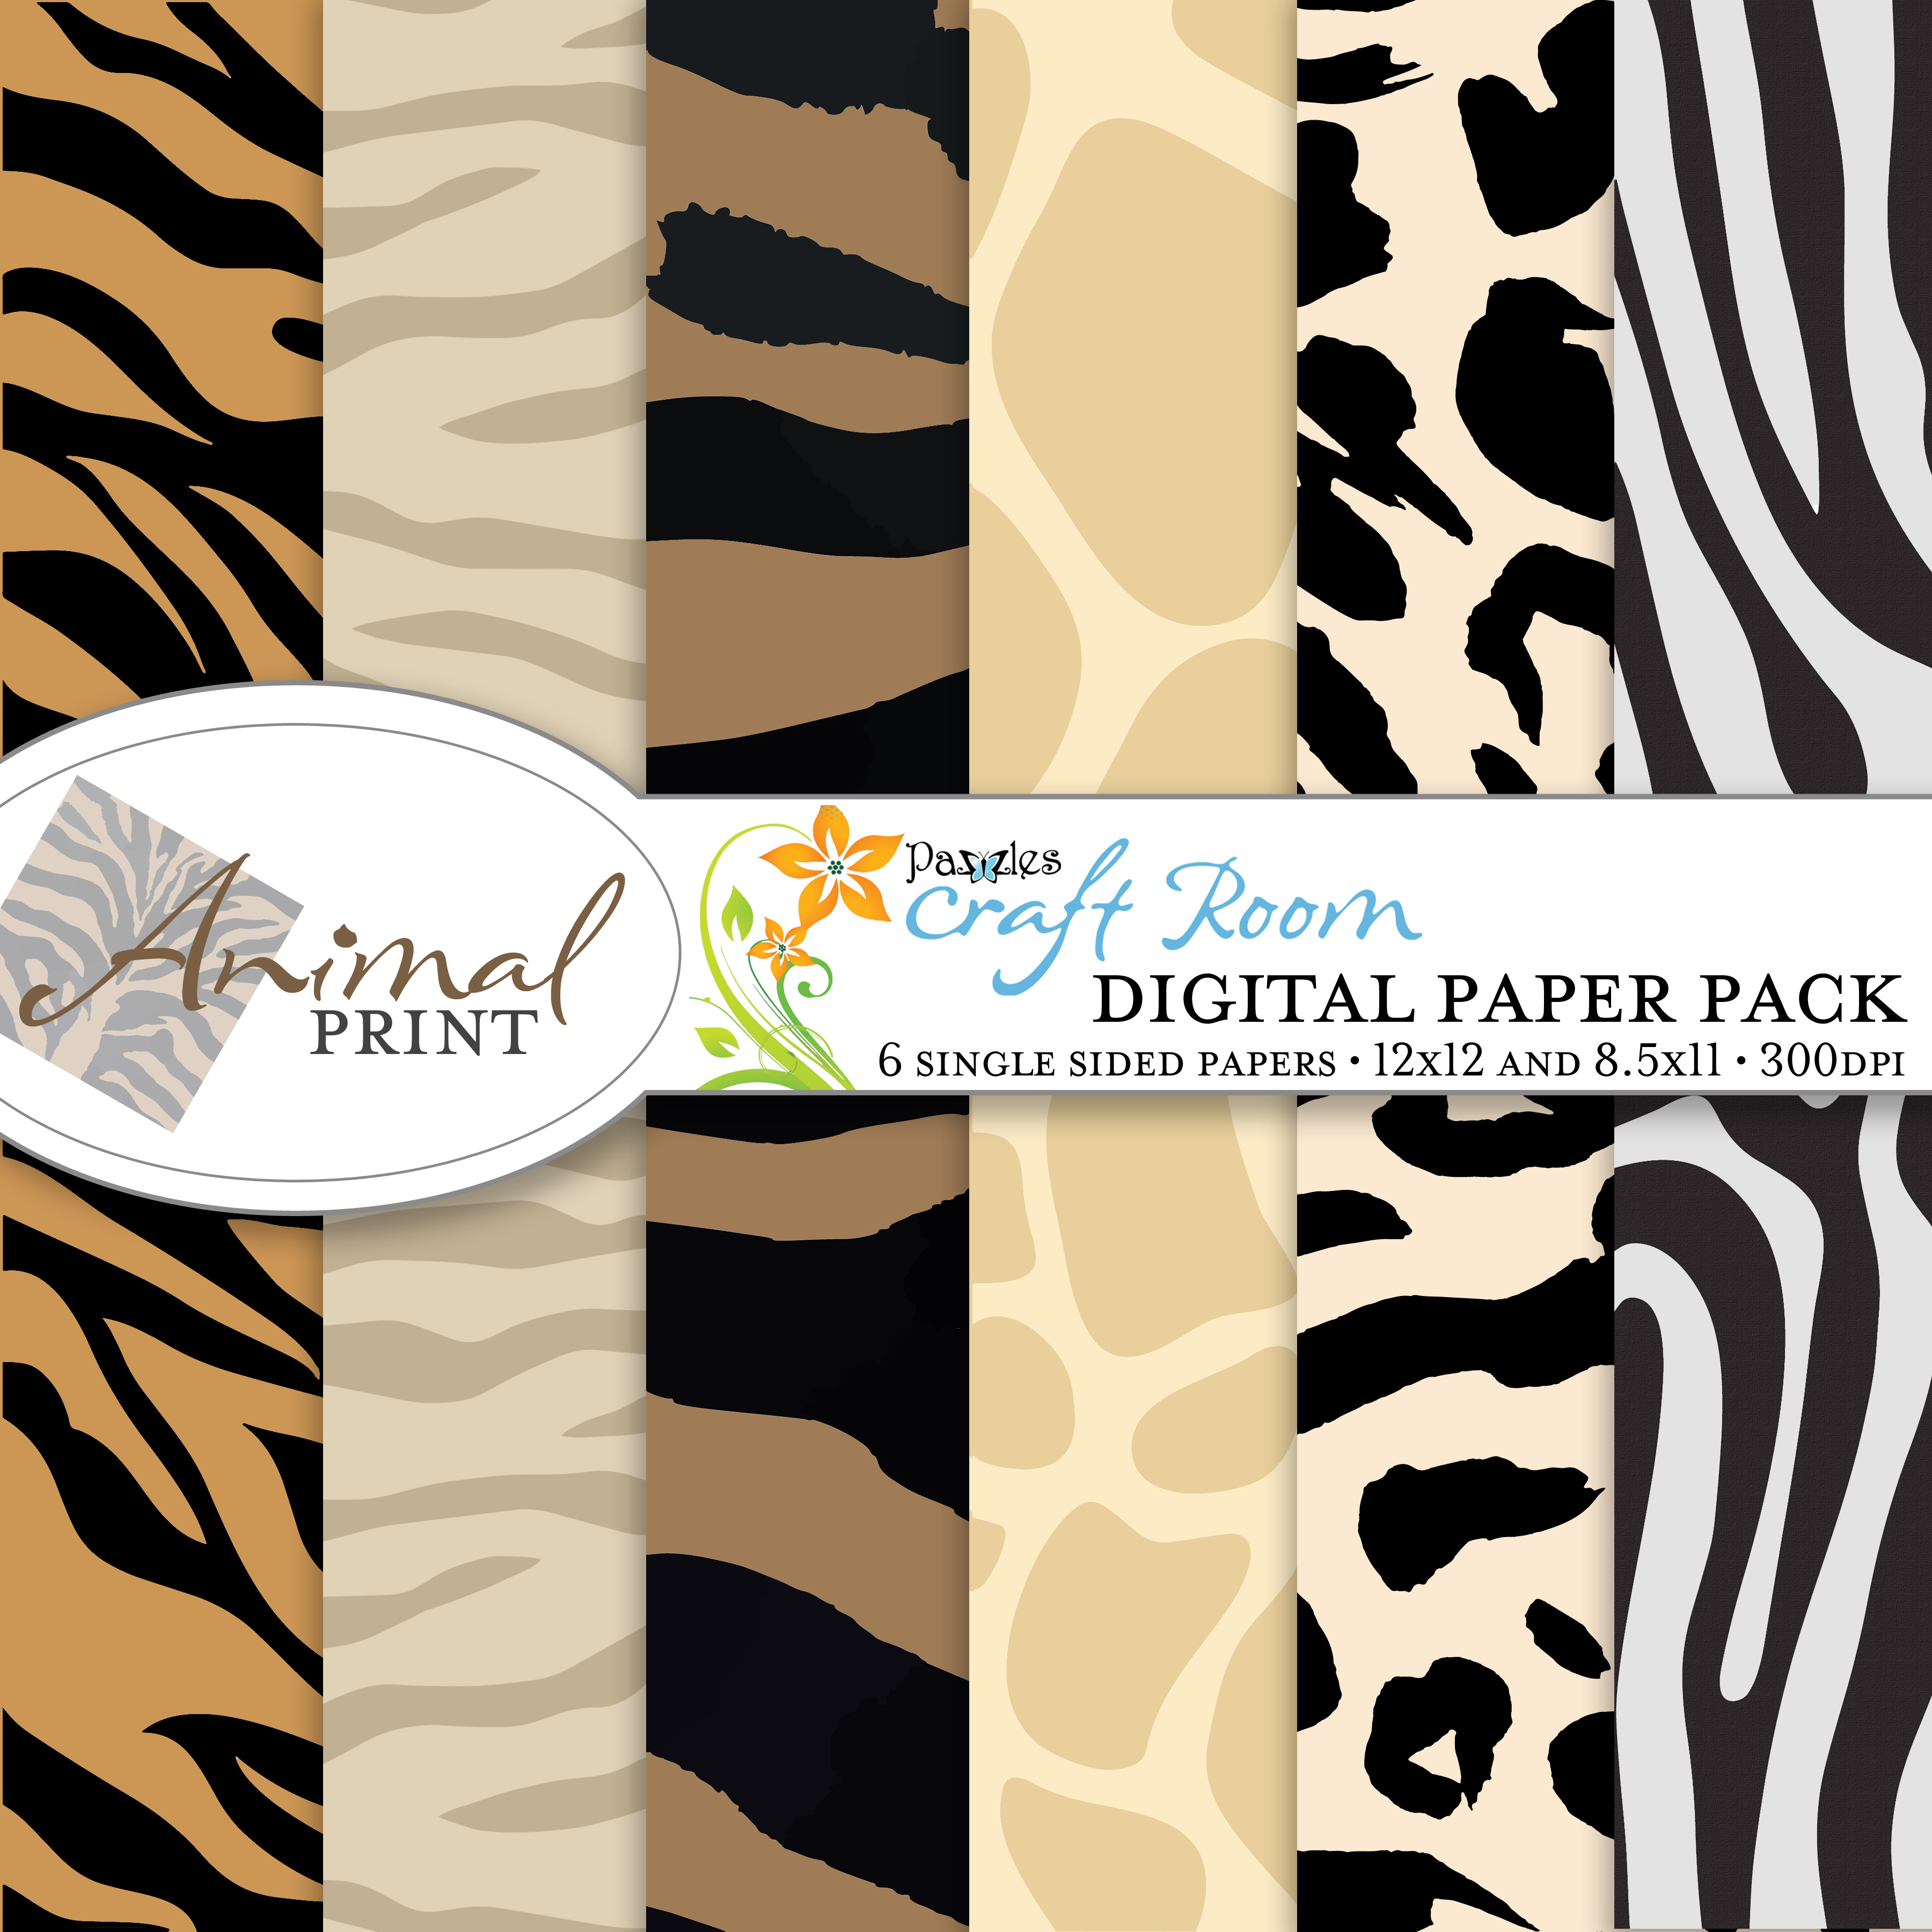 Animal Print Digital Paper Pack with instant download - Pazzles Craft Room